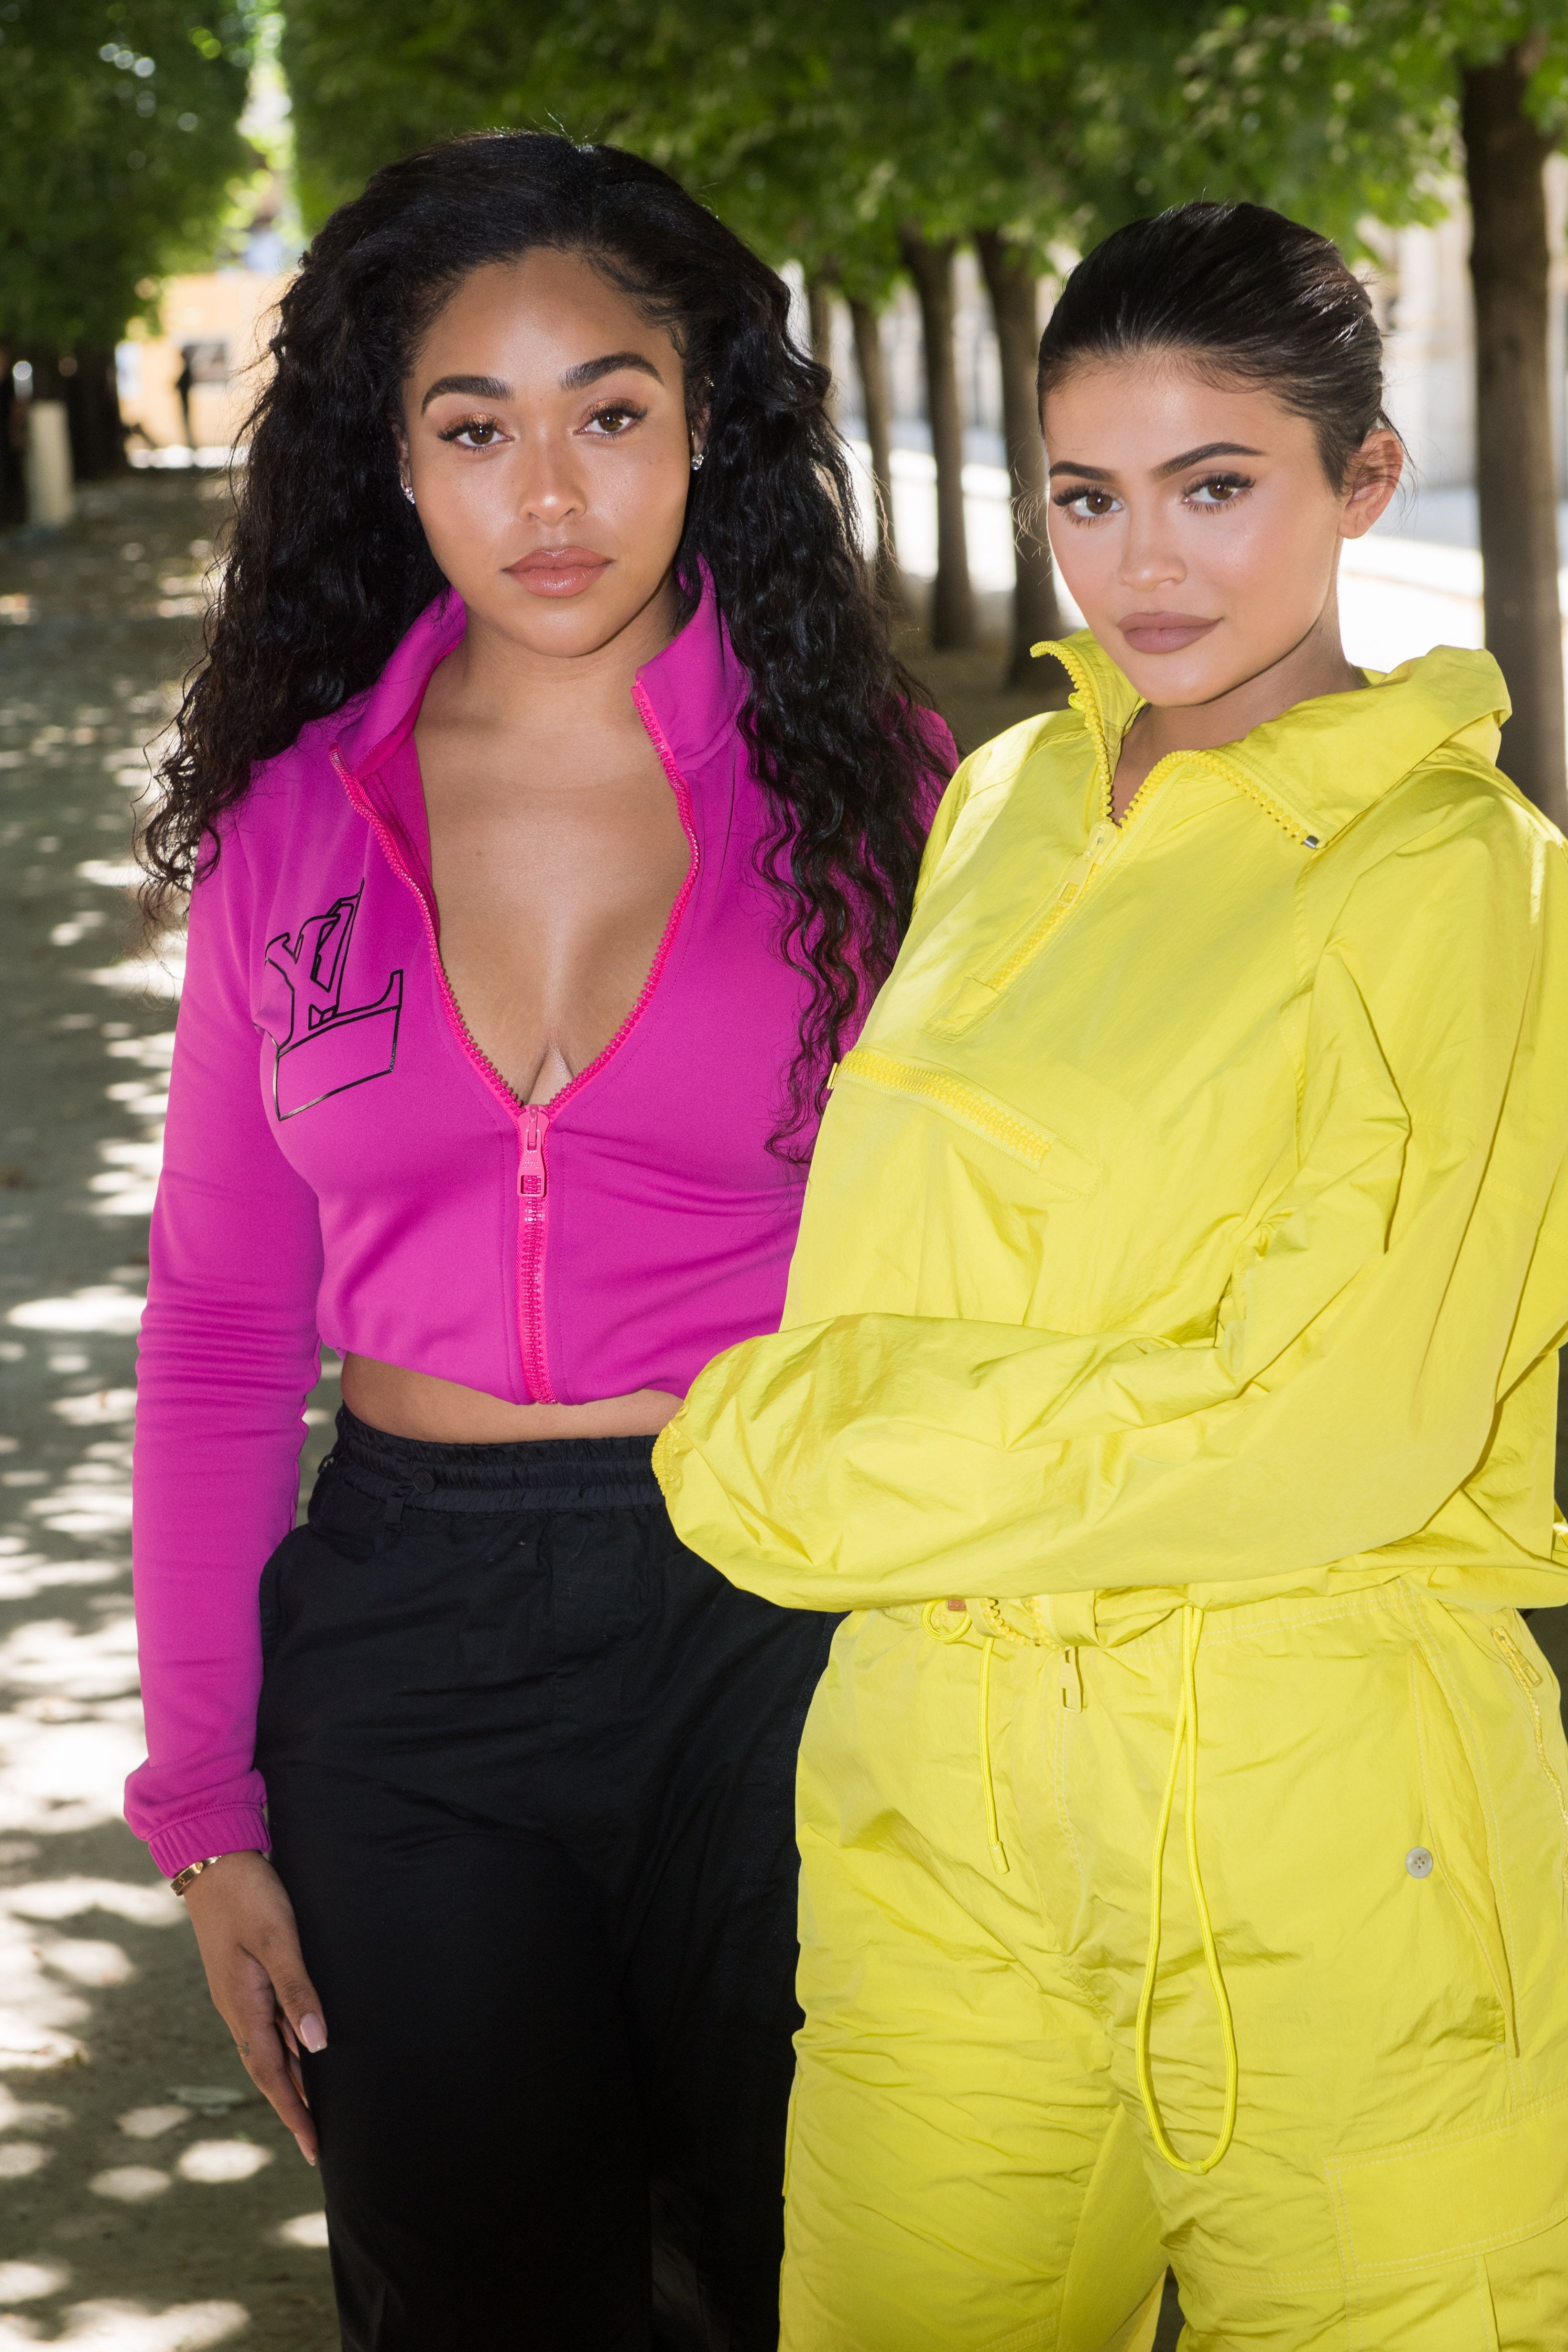 Jordyn Woods and Kylie Jenner at the Louis Vuitton Menswear Spring/Summer show for Paris Fashion Week Week on June 21, 2018, in Paris, France | Photo: Stephane Cardinale - Corbis/Getty Images